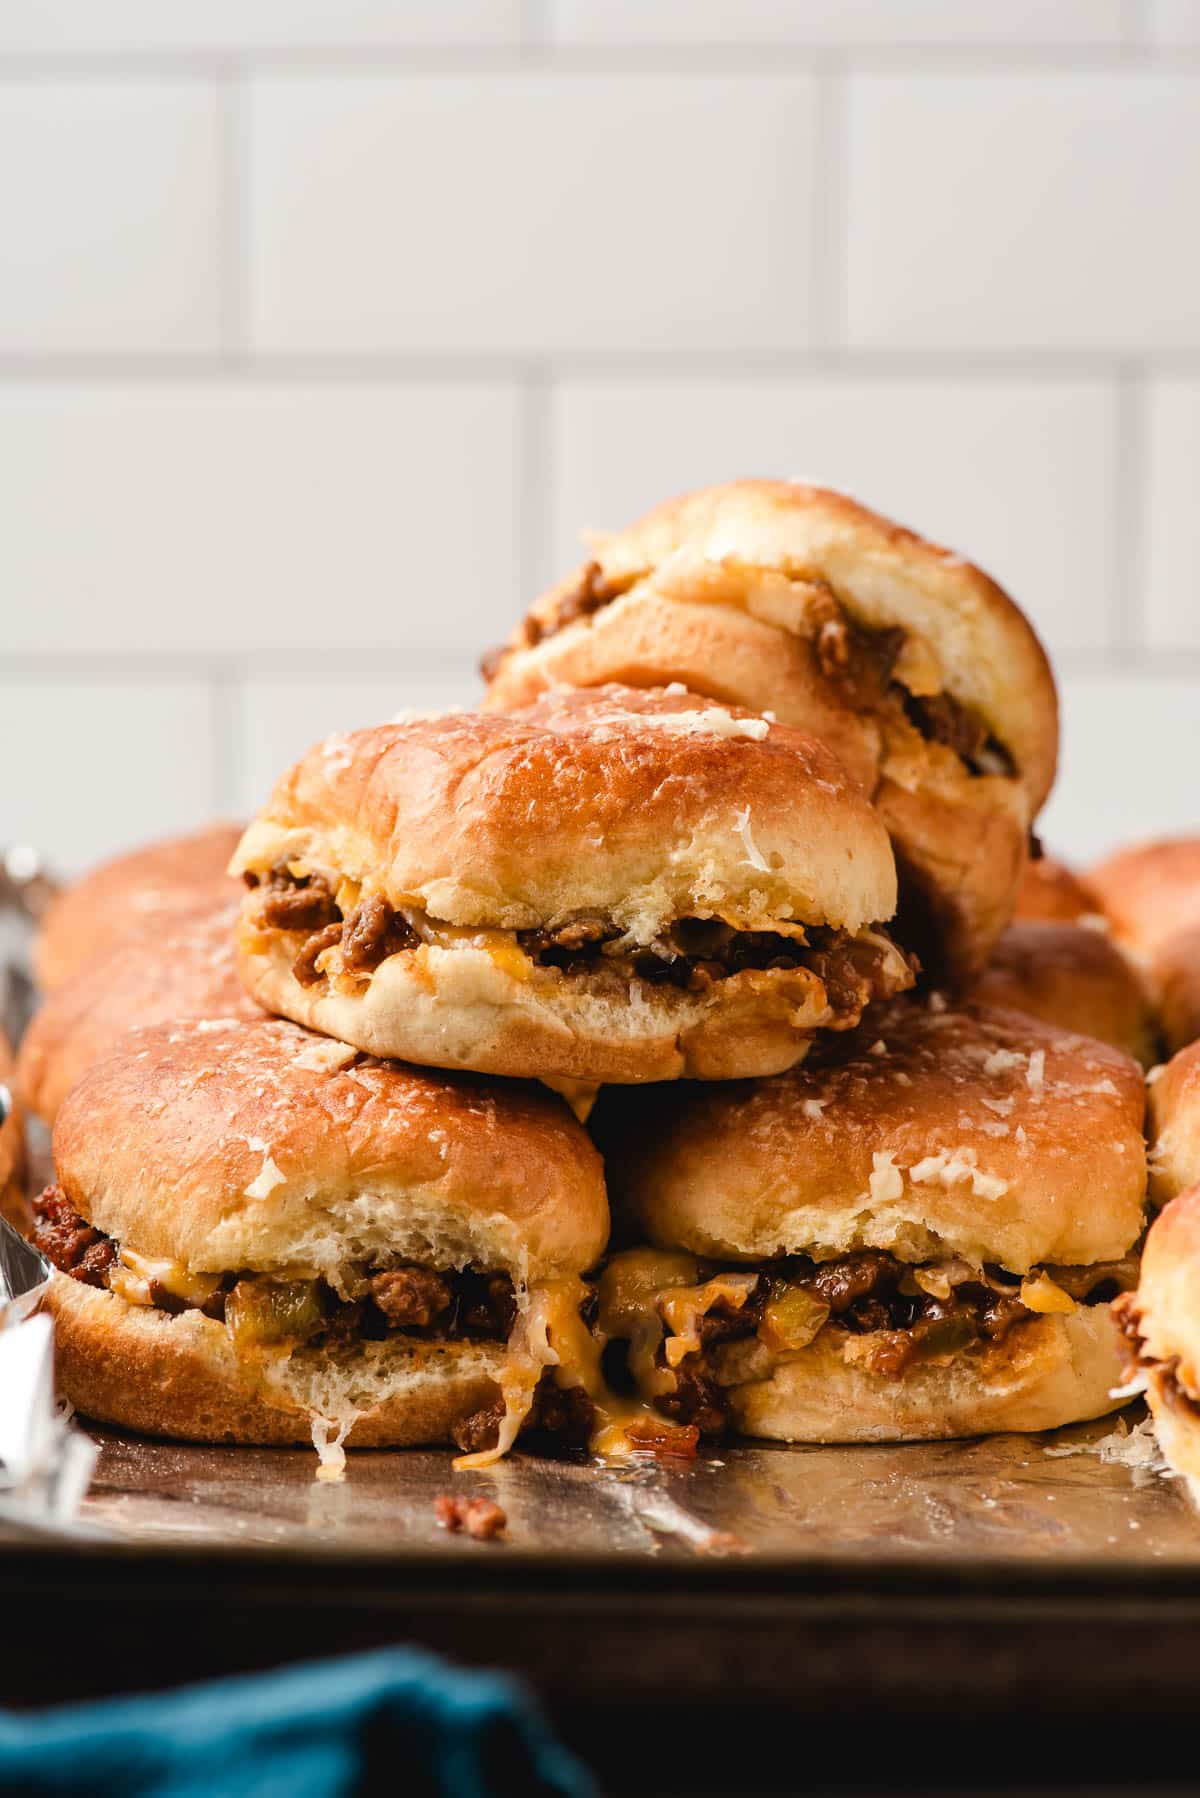 A stack of sloppy joe sliders on a baking tray.